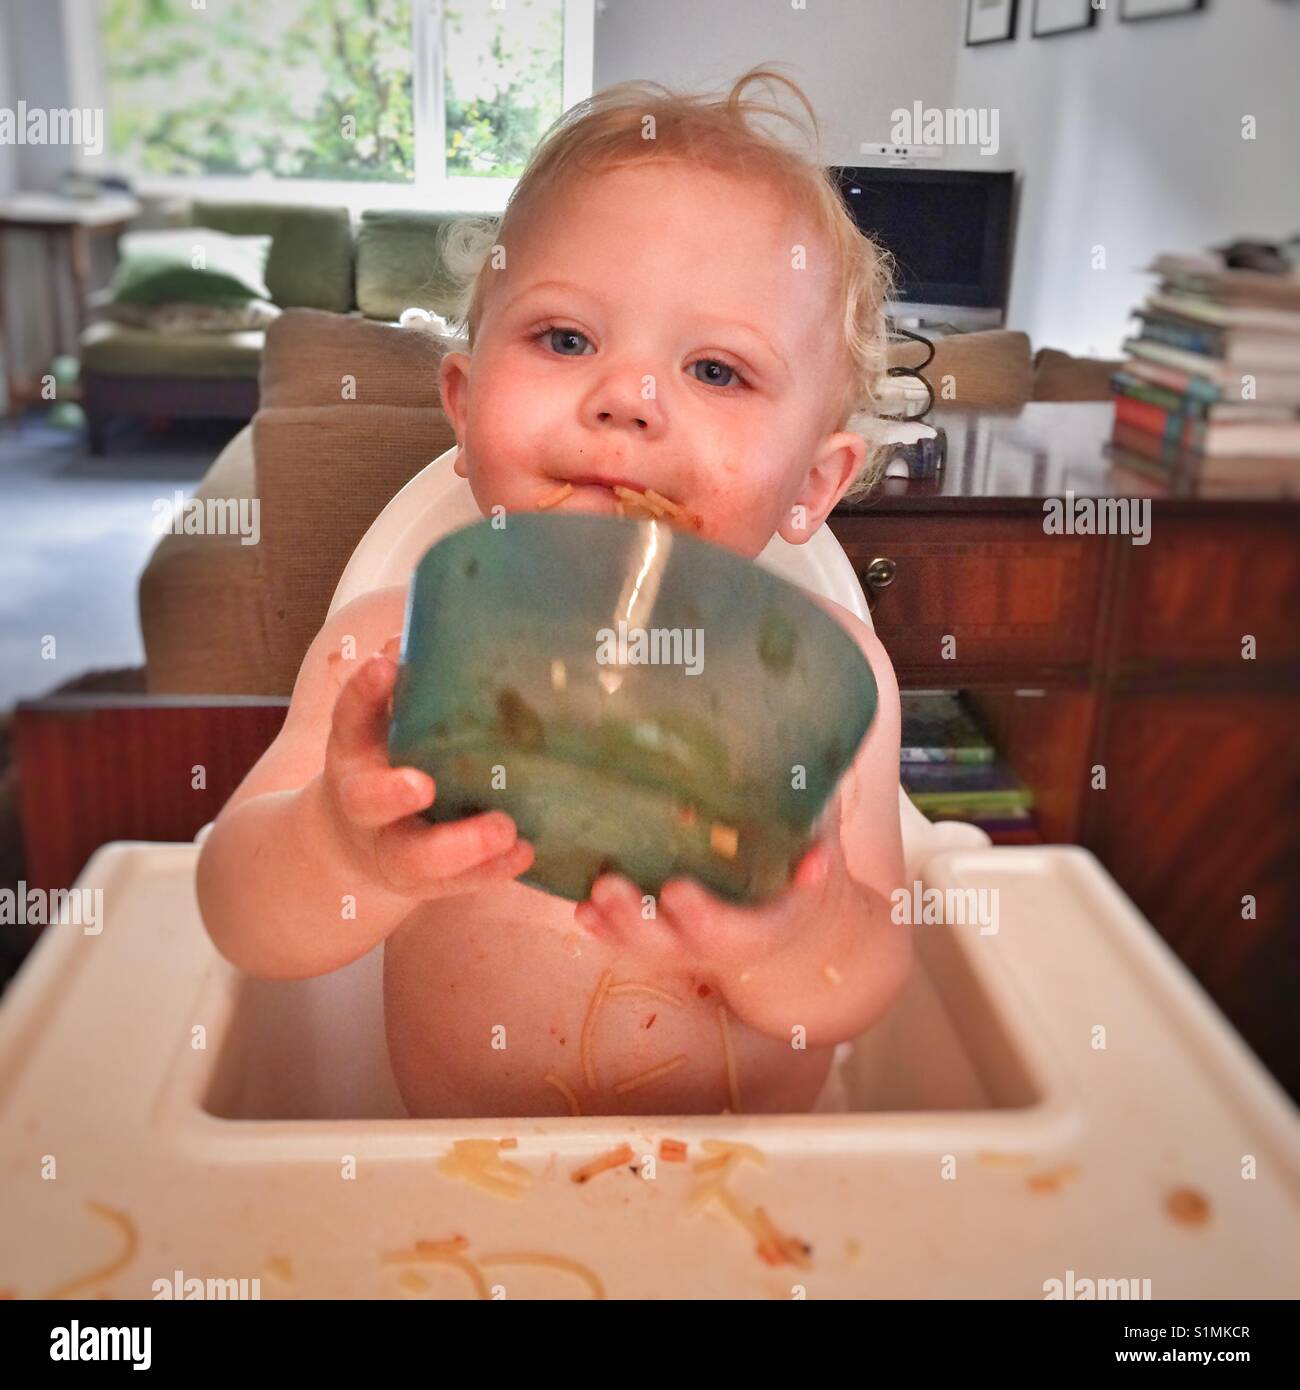 One year old baby boy eating pasta Stock Photo